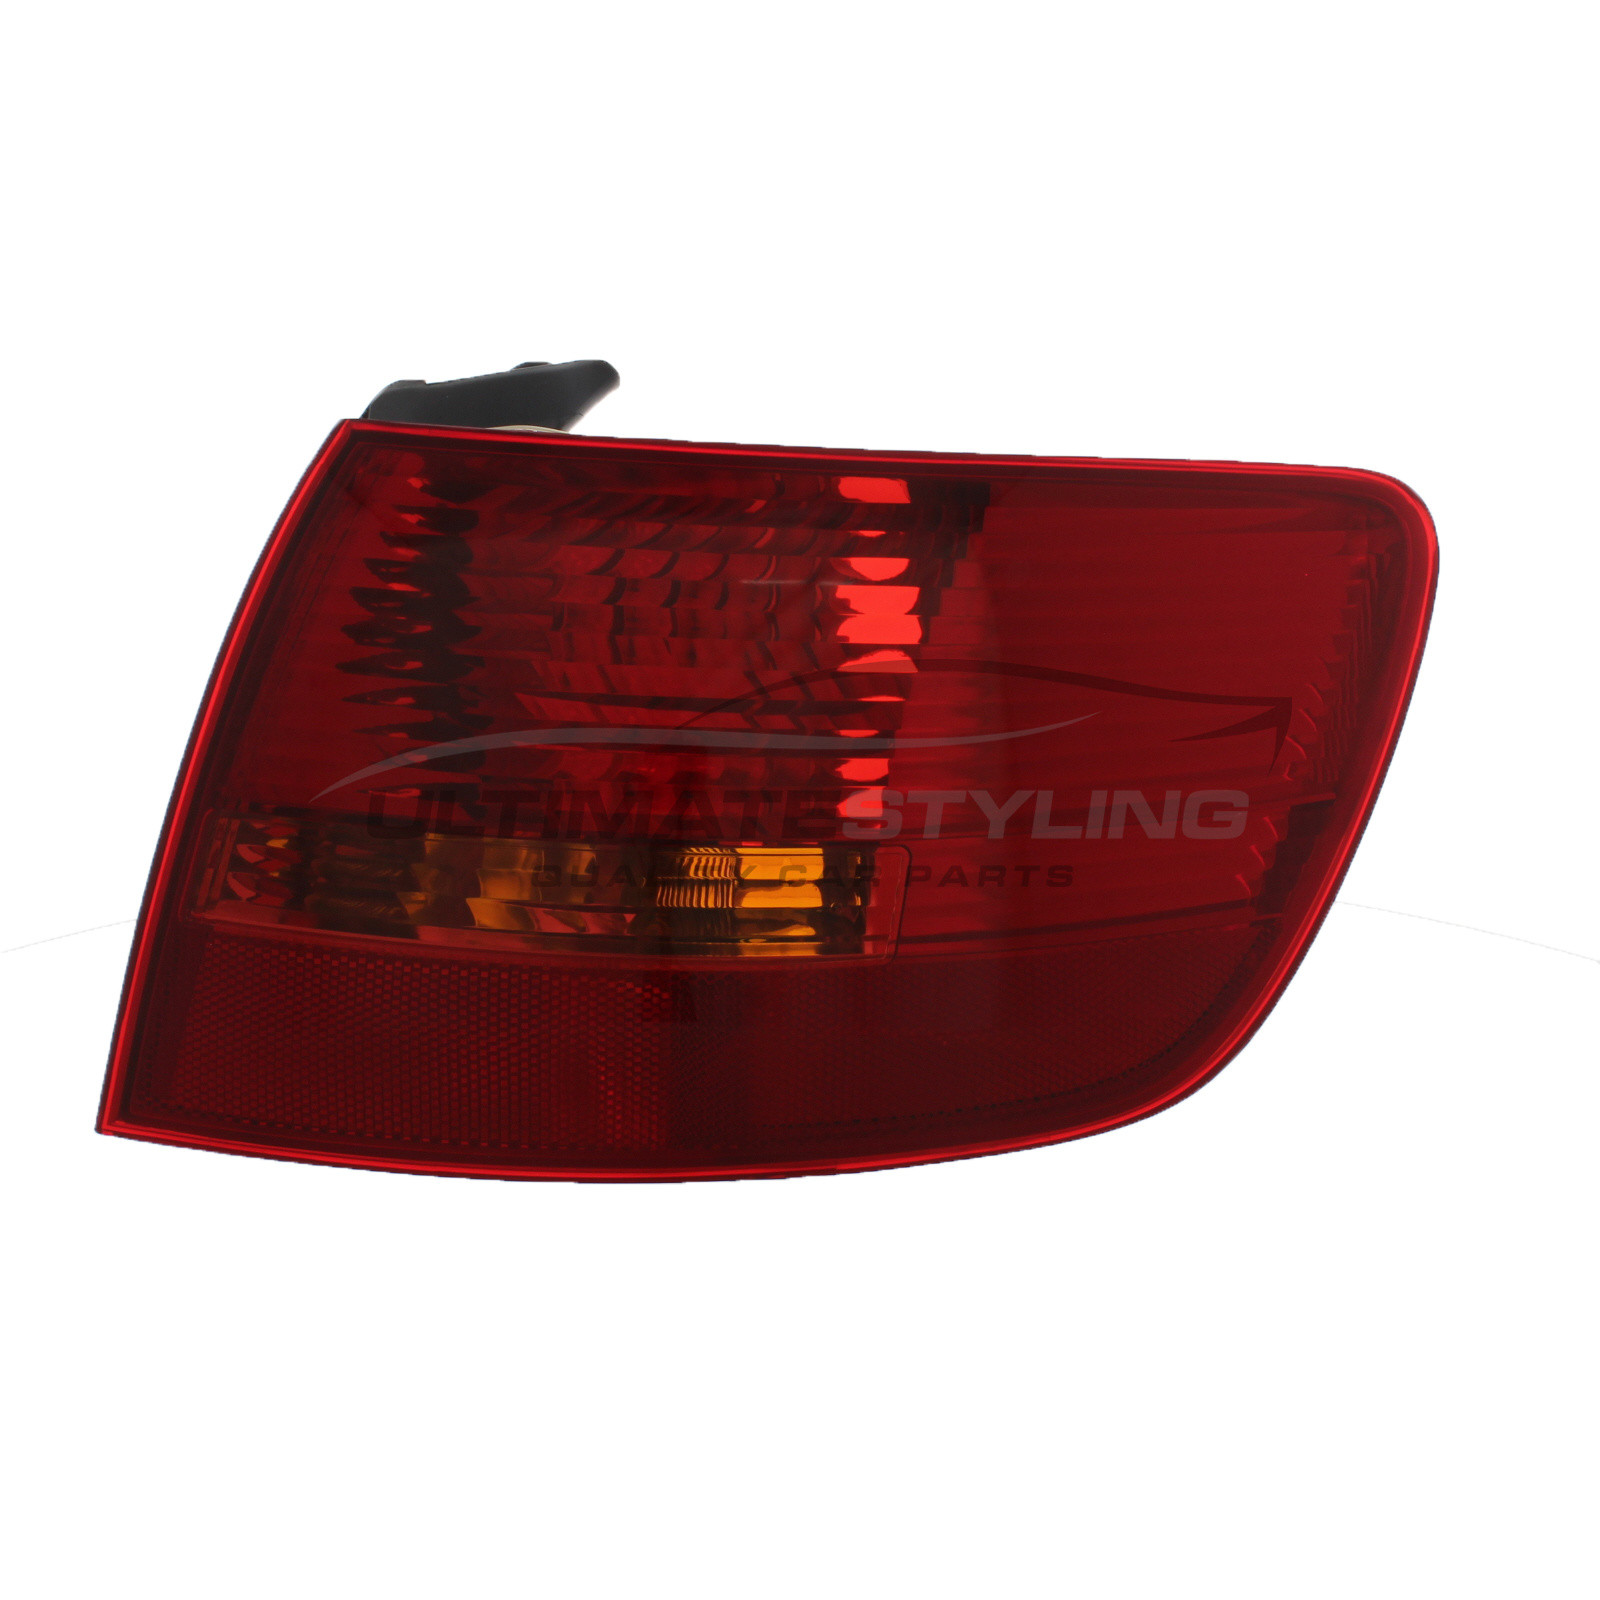 Audi A6 2005-2008 / Audi Allroad 2005-2007 / Audi S6 2006-2007 Non-LED Outer (Wing) Rear Light / Tail Light Excluding Bulb Holder Drivers Side (RH)